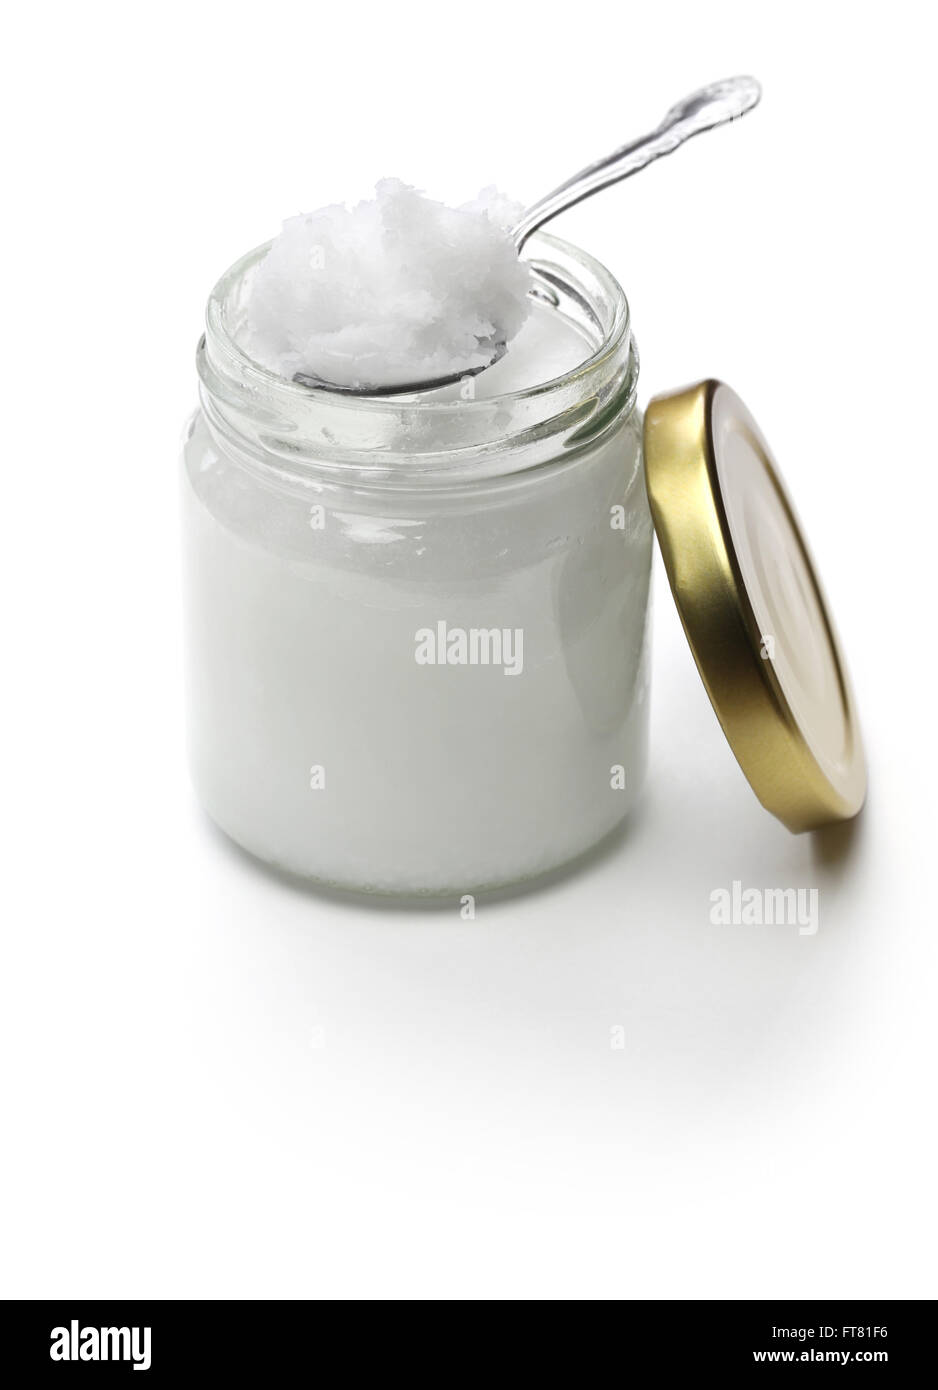 Download Coconut Oil Jar High Resolution Stock Photography And Images Alamy Yellowimages Mockups